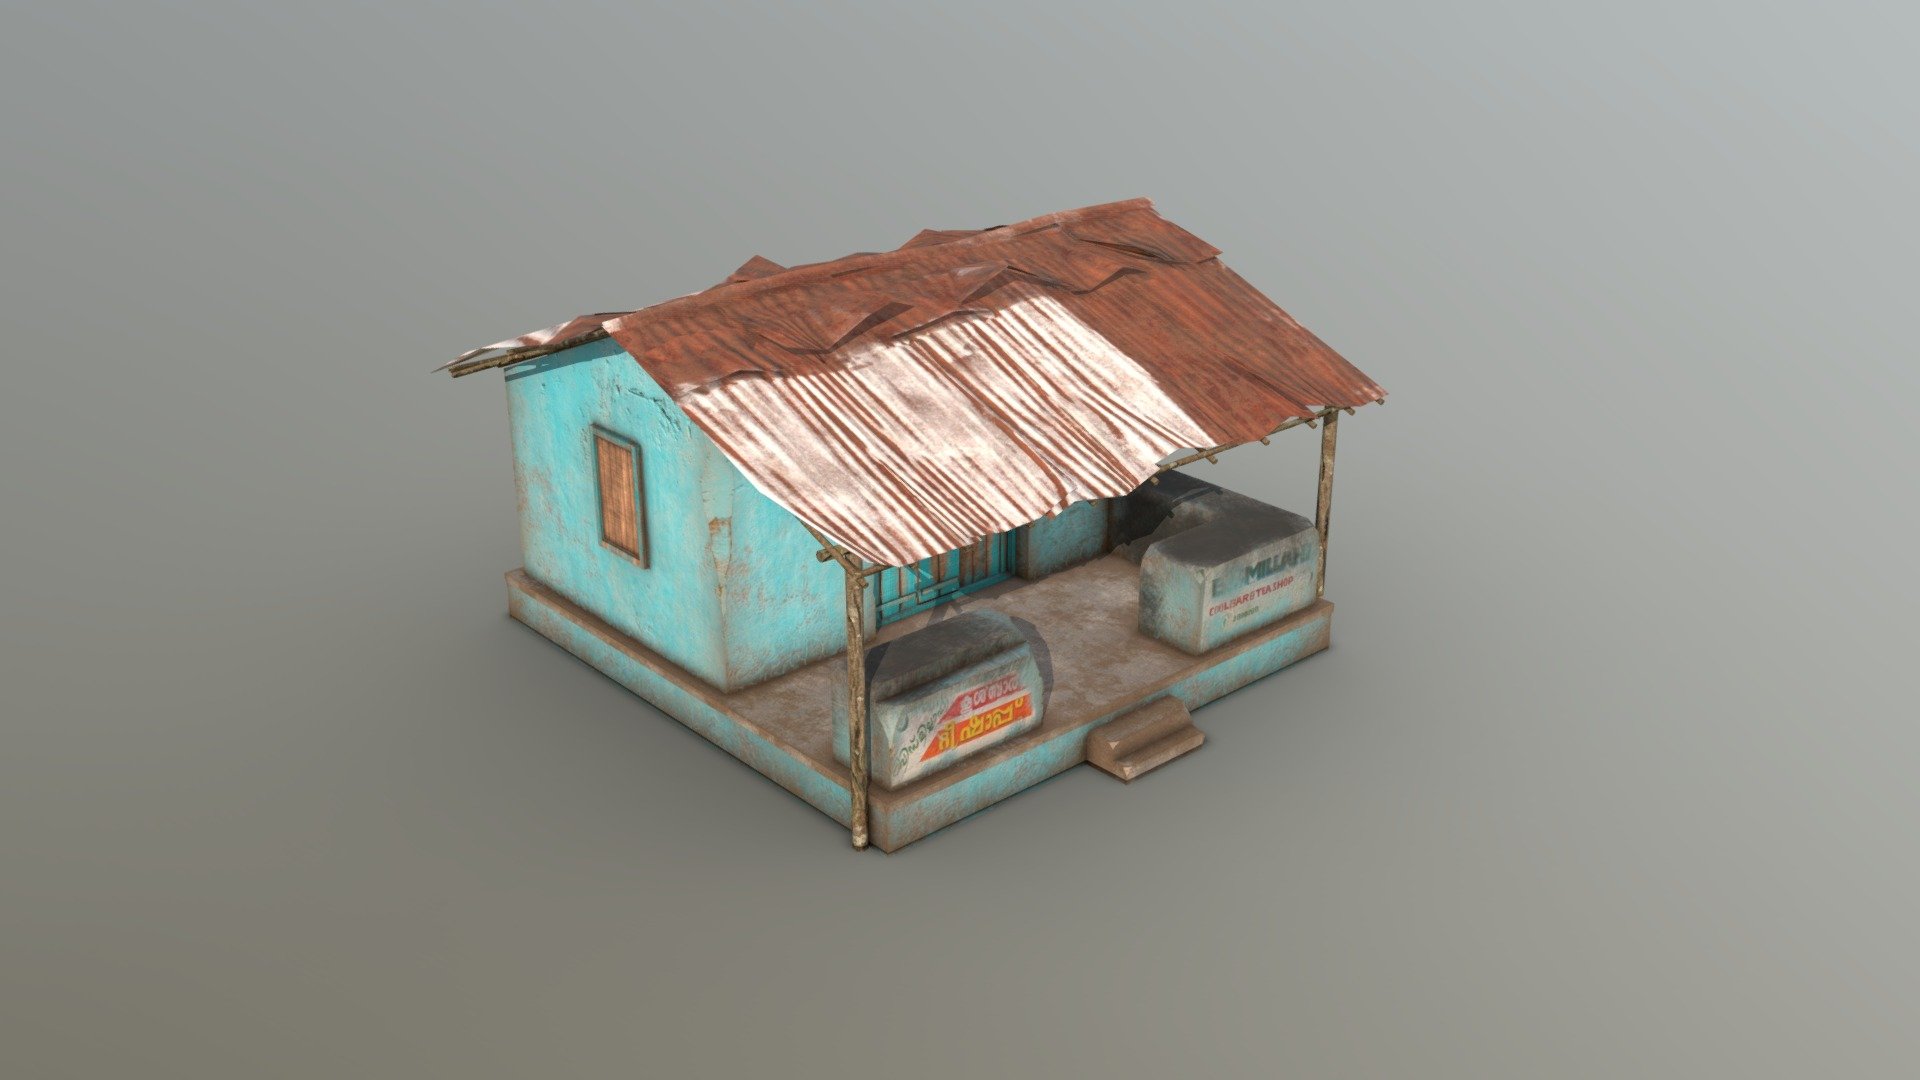 Low poly model of a small tea shop.  Made for Cities Skylines.
2.4k tris ,PBR Specular , 2K Textures . 
Fbx and Obj   , included. 

I am making a bunch of buildings and props in this theme. Will be posting evrything on sketchfab. Some of them will be free. This is the first of many . I will be posting Work in Progress stuff on sketchfab before uploading the final ones. Follow me get a glimpse of upcoming stuff. 

If you have questions about my models or need any kind of help, feel free to contact me and i’ll do my best to help you 3d model